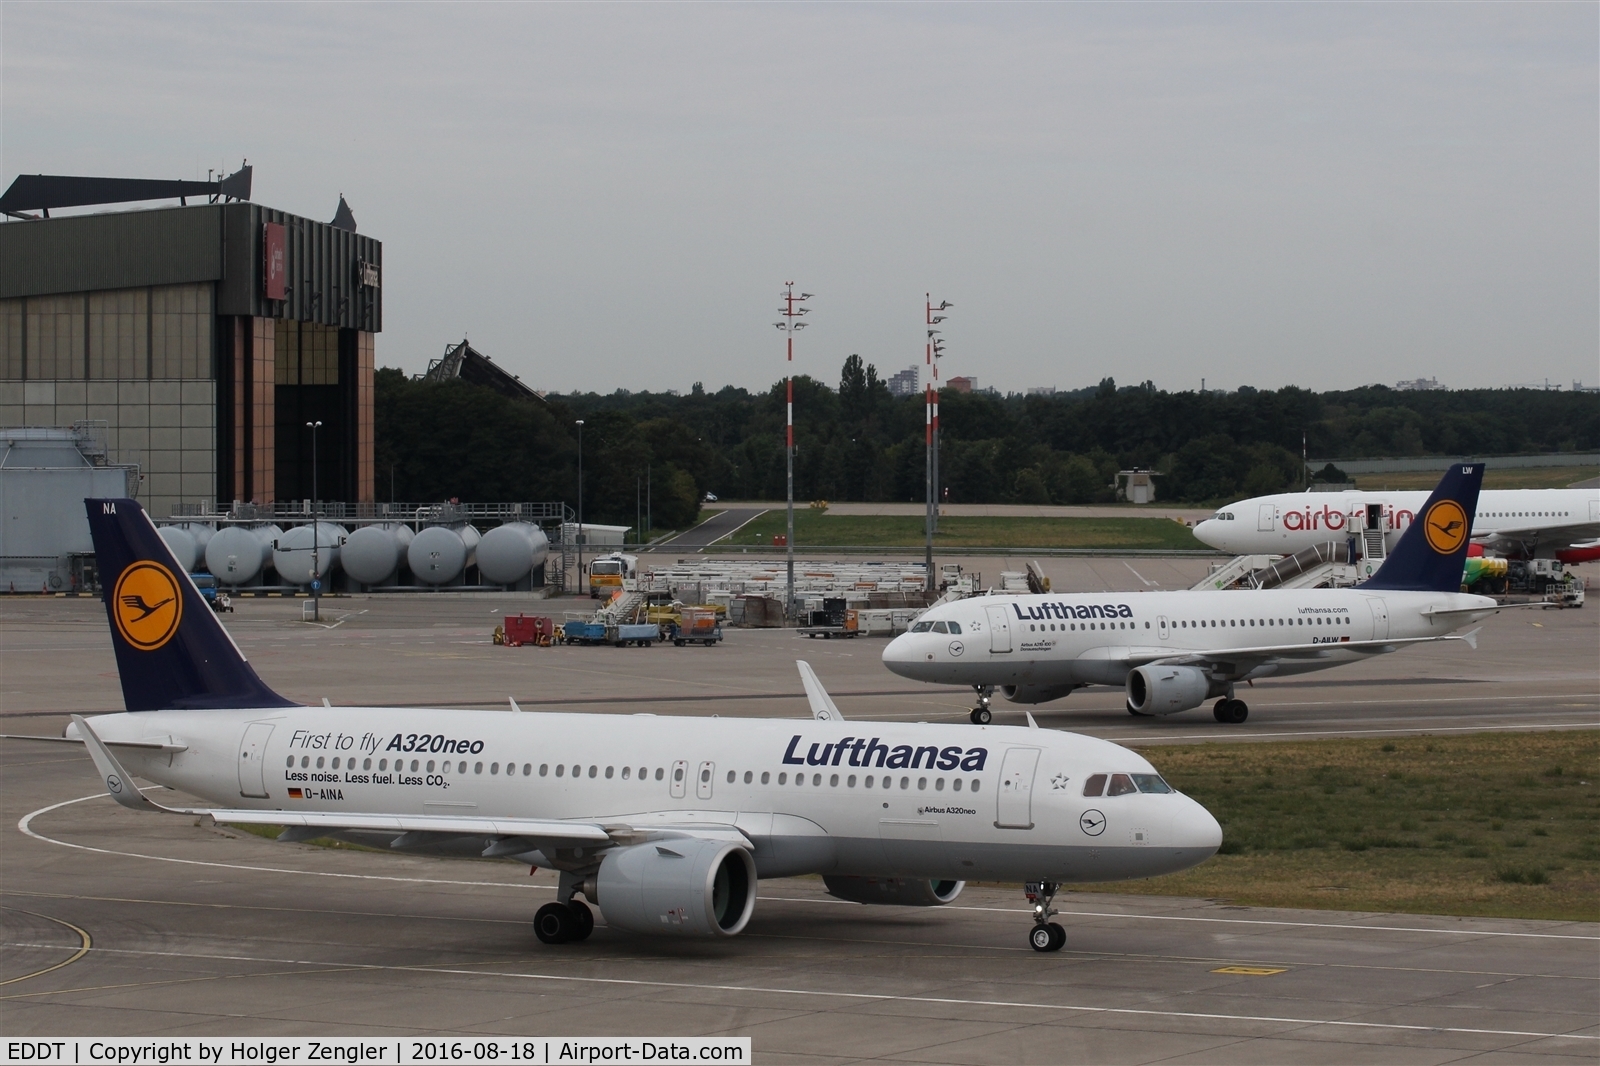 Tegel International Airport (closing in 2011), Berlin Germany (EDDT) - Crowded apron and no sun at all......